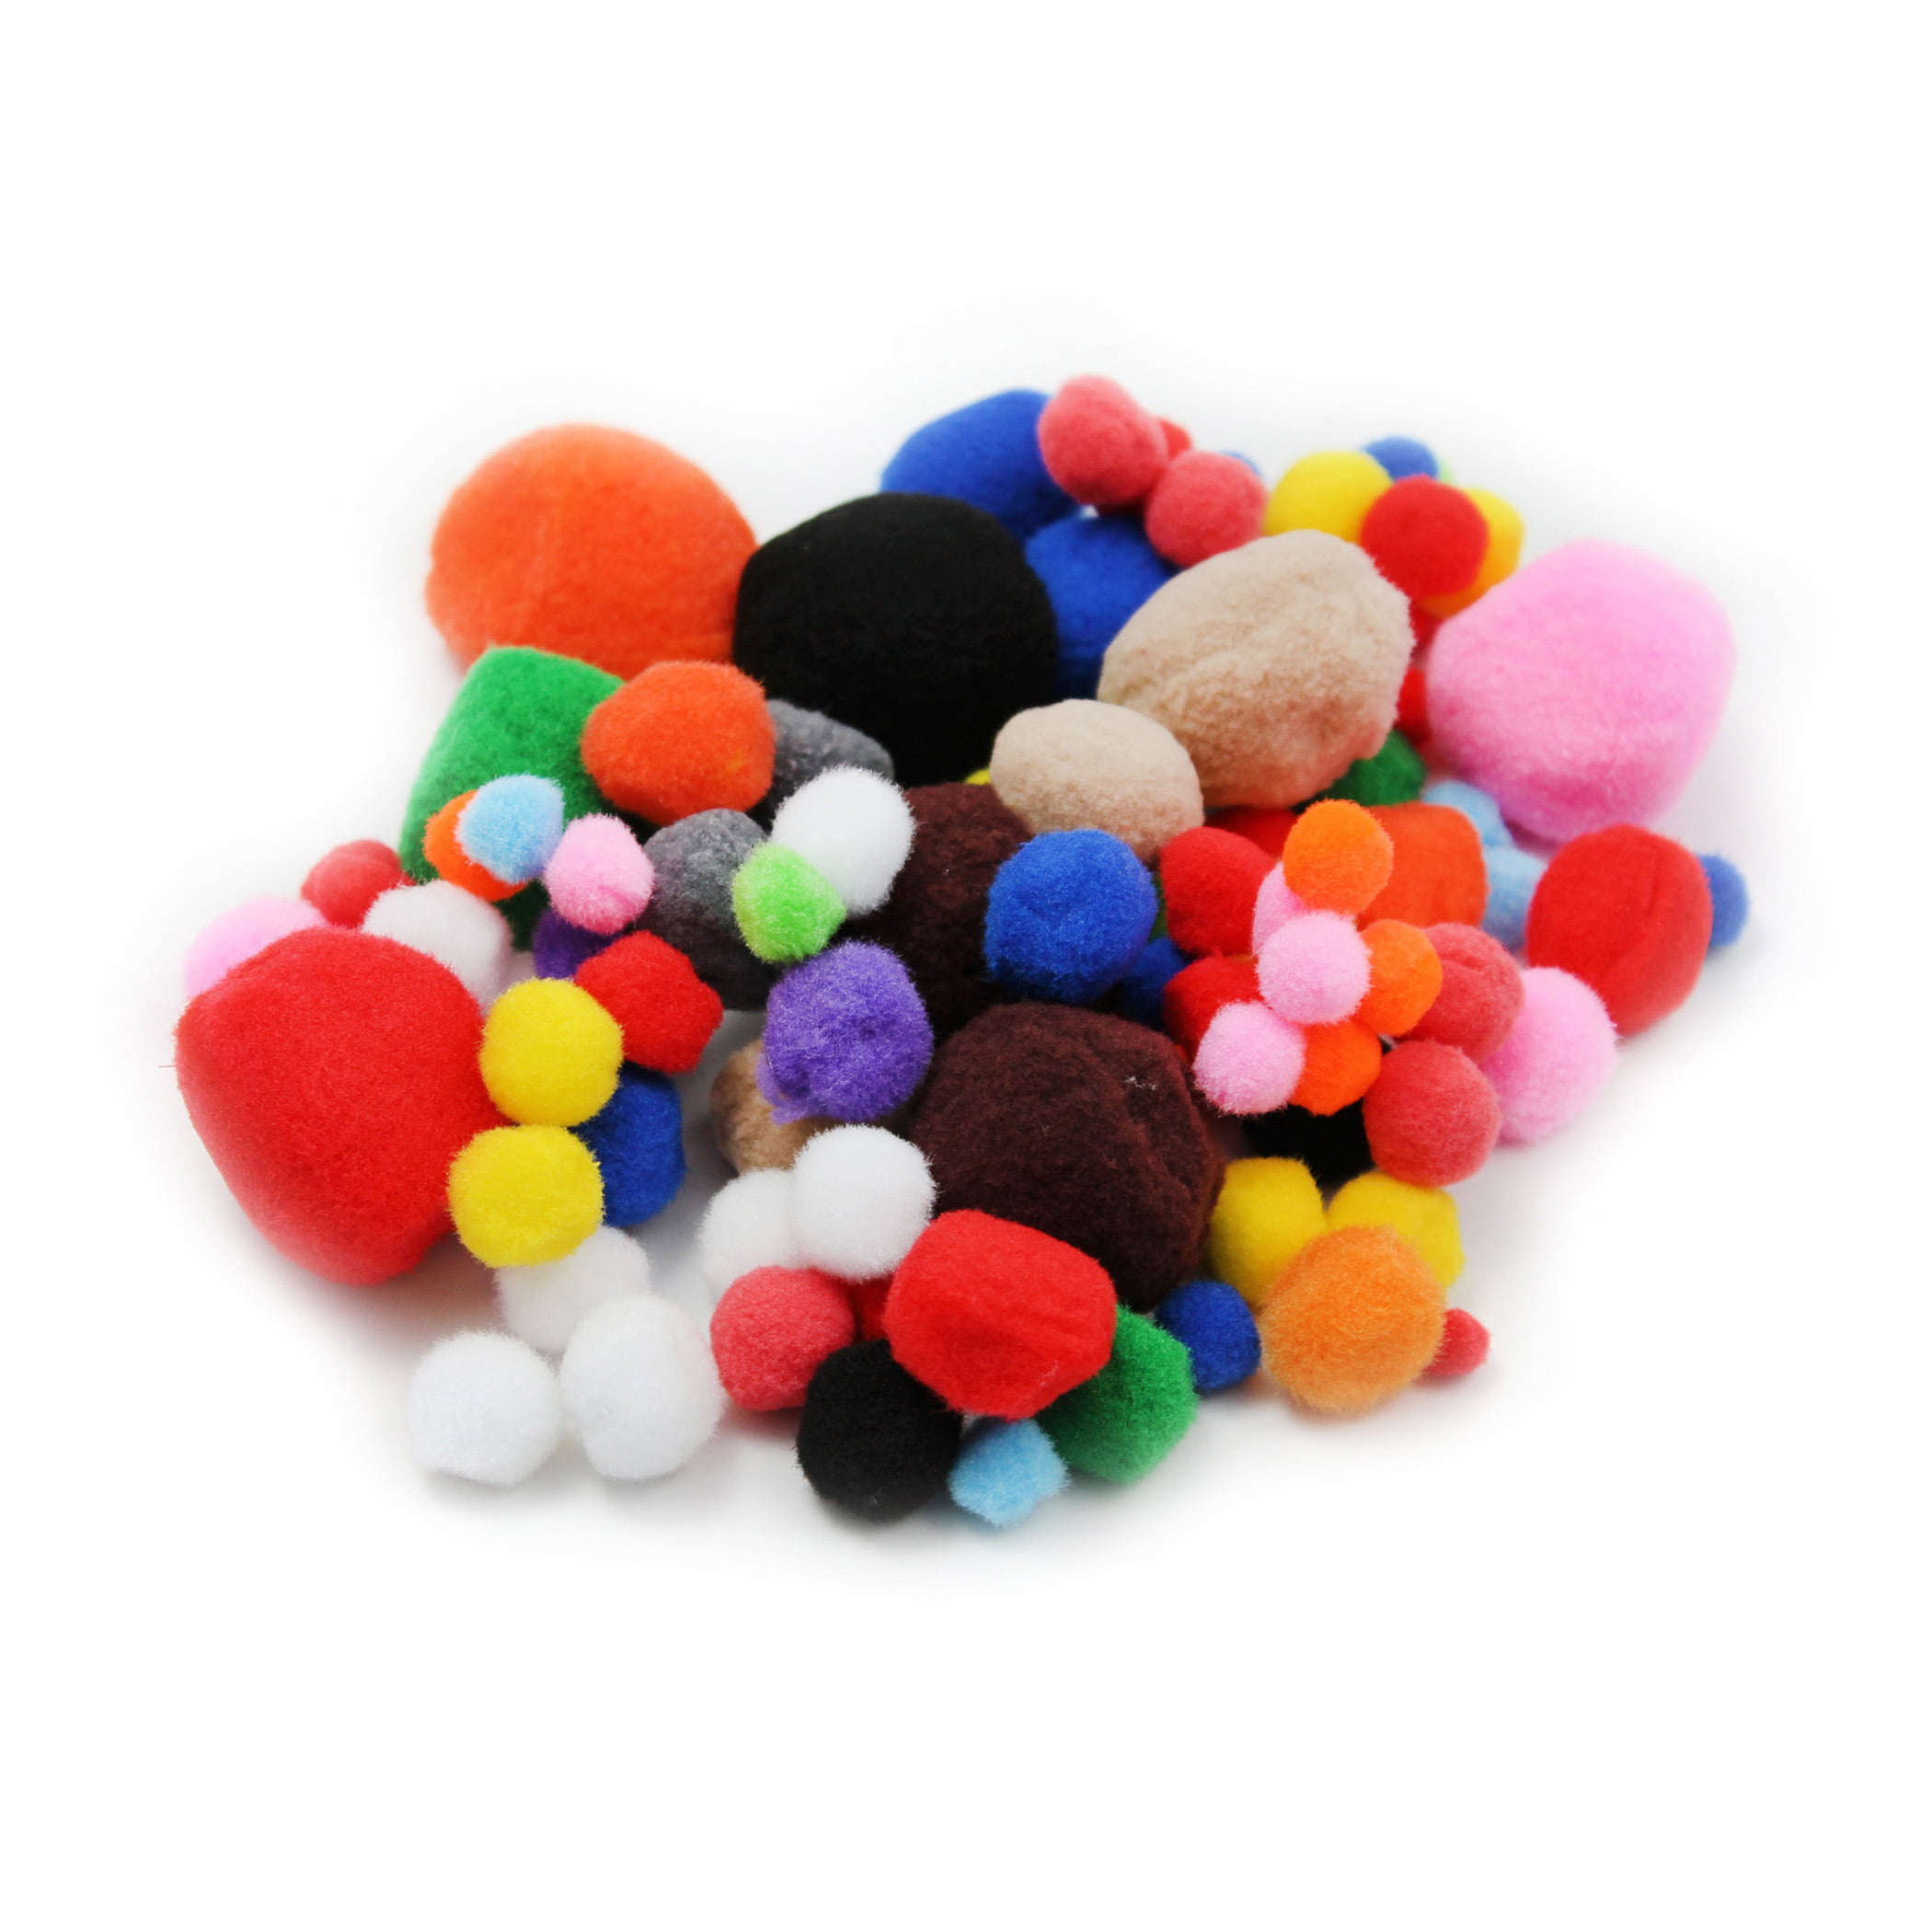 Adeweave 1.5 inch 100 Pom Poms - Multicolor Pompoms for Crafts in Assorted Colors Soft and Fluffy Large Pom Poms for Crafts in Reusable Zipper Bag